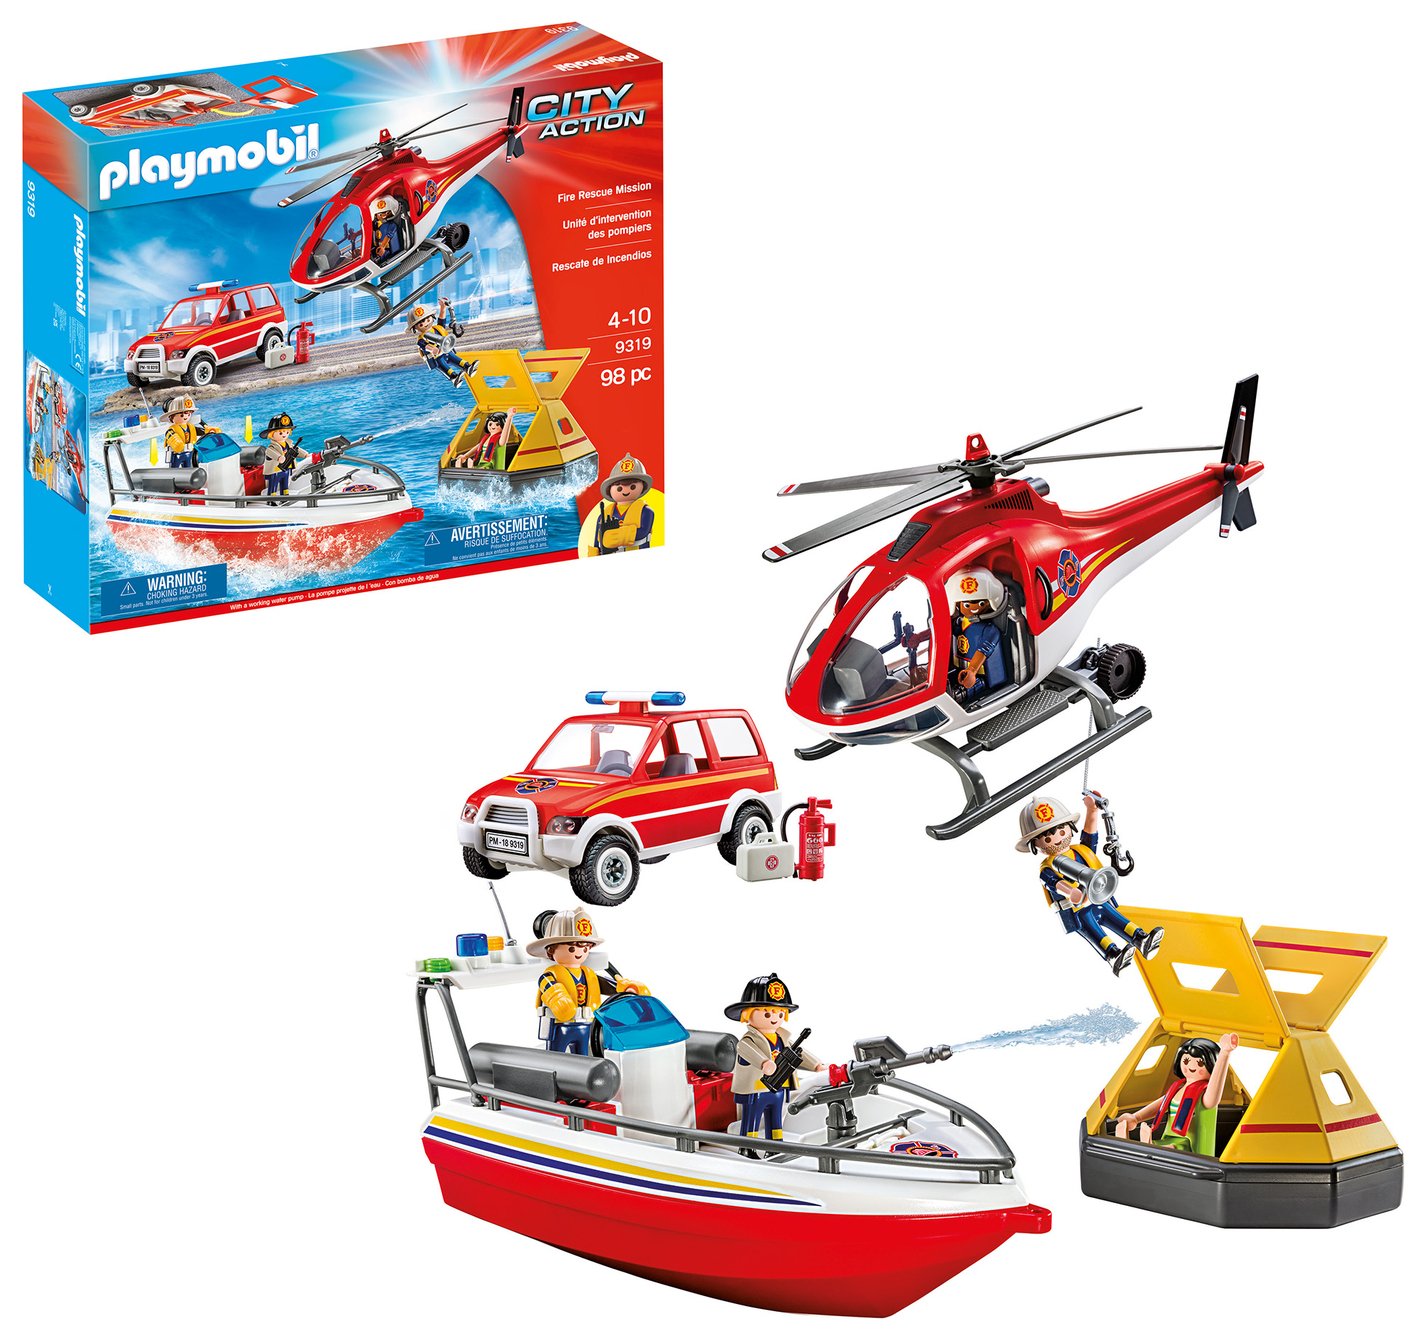 Playmobil 9319 City Action Fire Rescue Mission Playset review